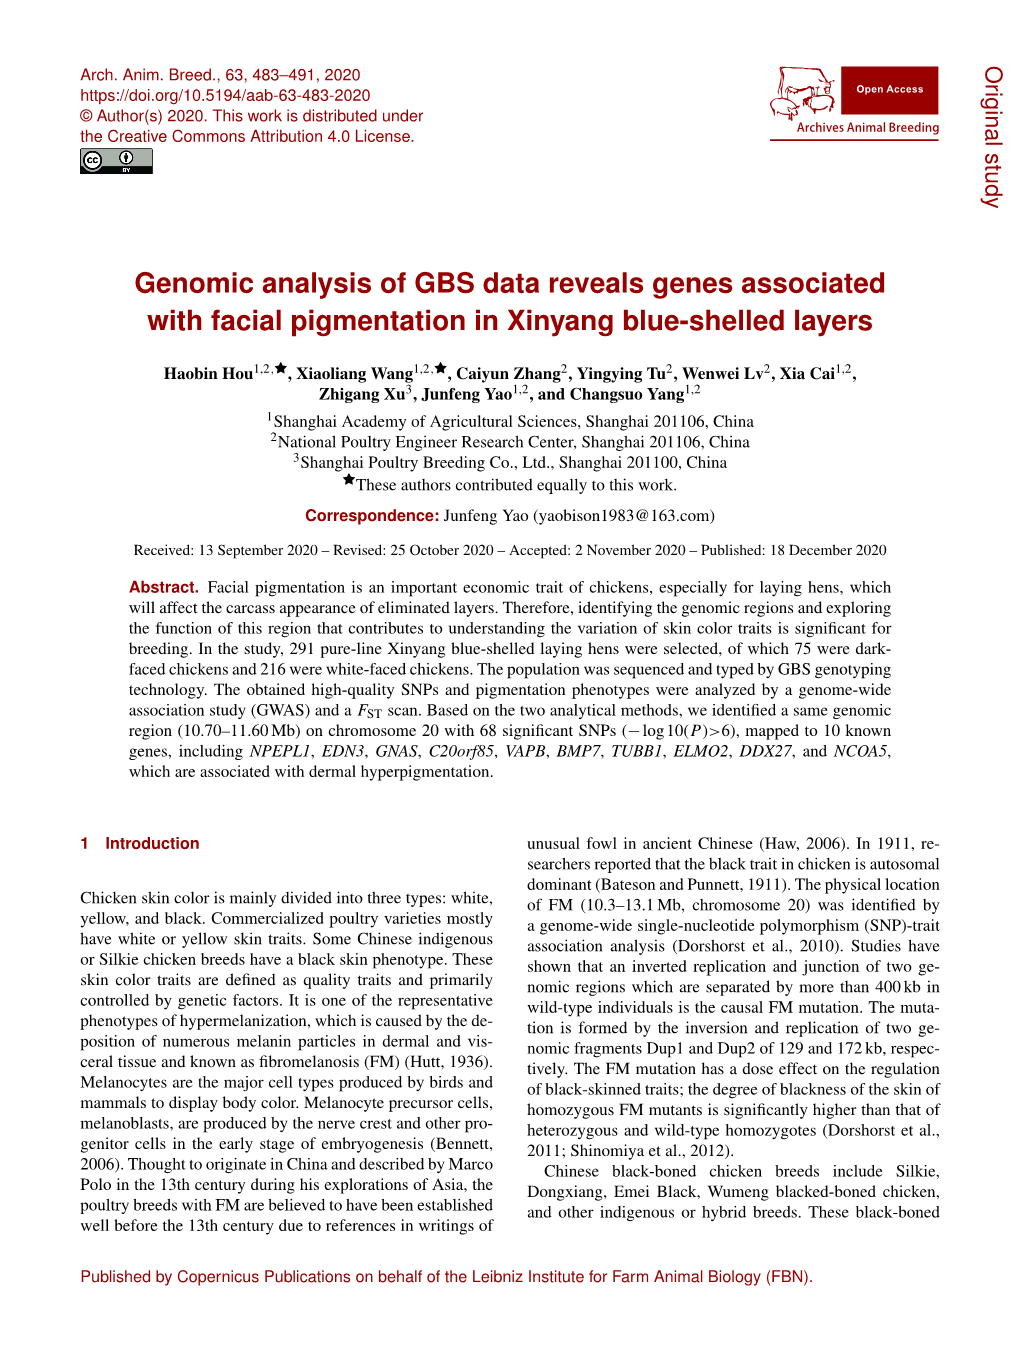 Genomic Analysis of GBS Data Reveals Genes Associated with Facial Pigmentation in Xinyang Blue-Shelled Layers